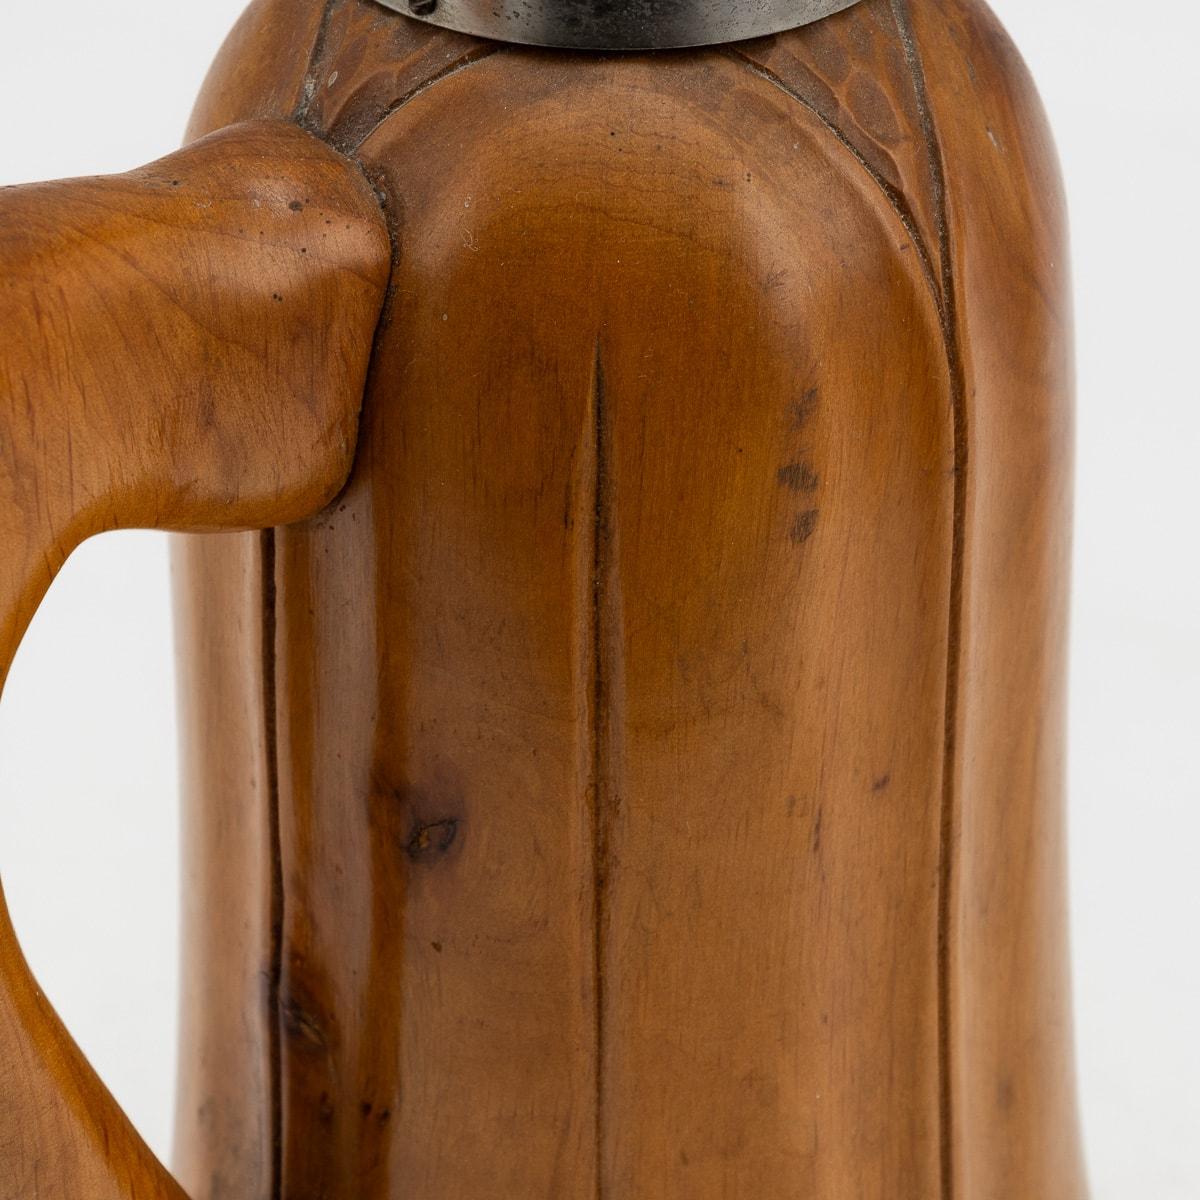 20th Century Italian Wooden Flask By Aldo Tura For Macabo c.1960 For Sale 3